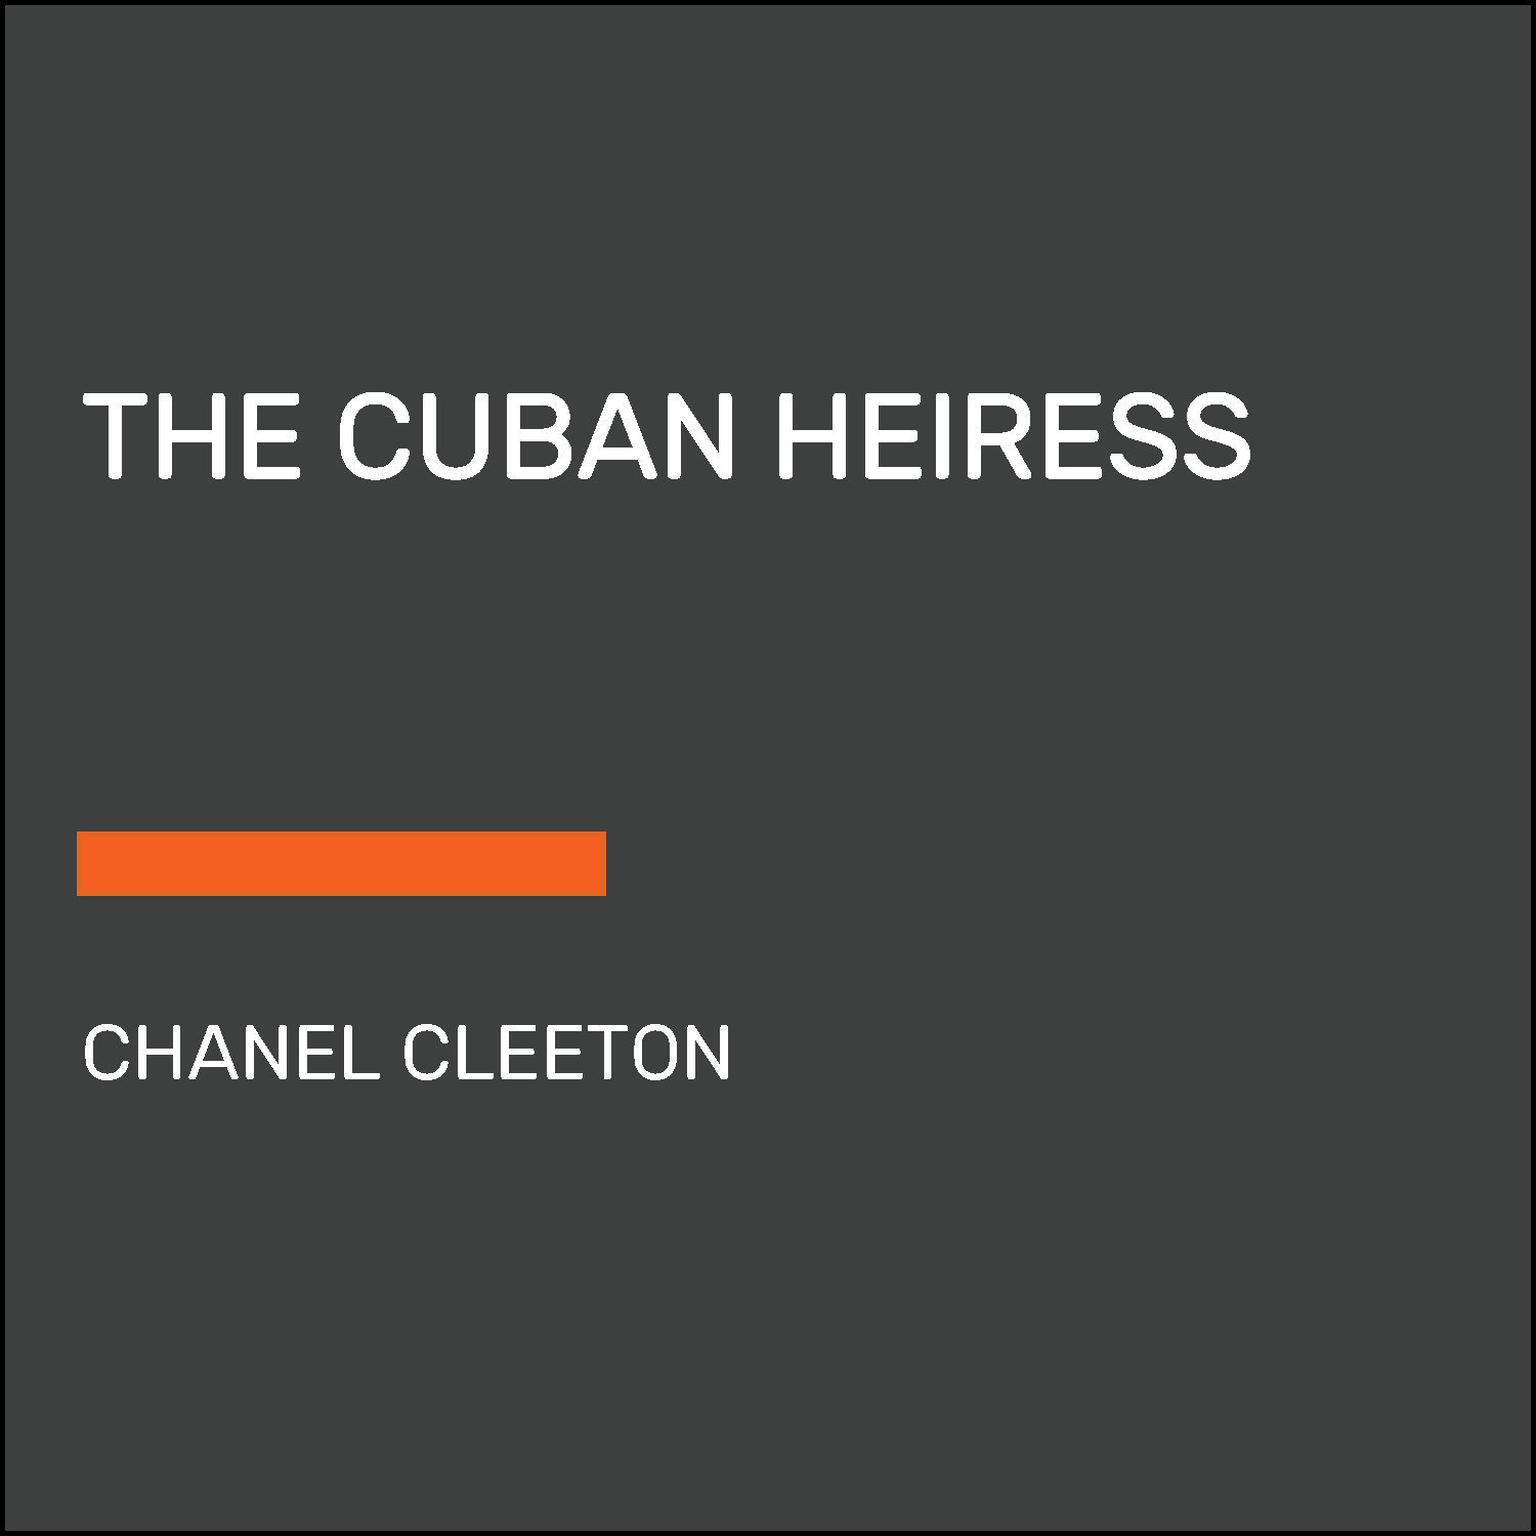 The Cuban Heiress Audiobook, by Chanel Cleeton